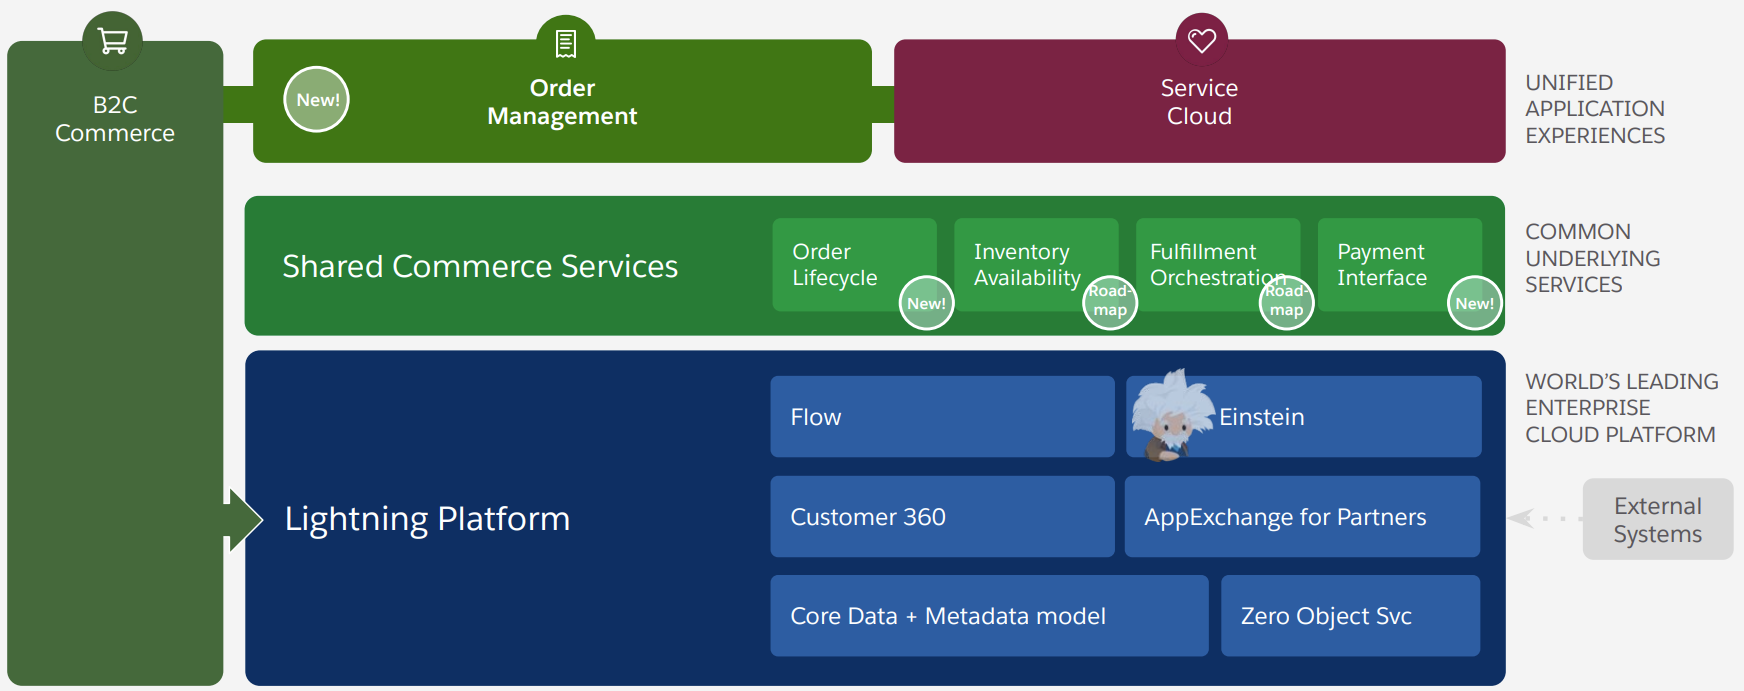 Salesforce Order Management Product Overview